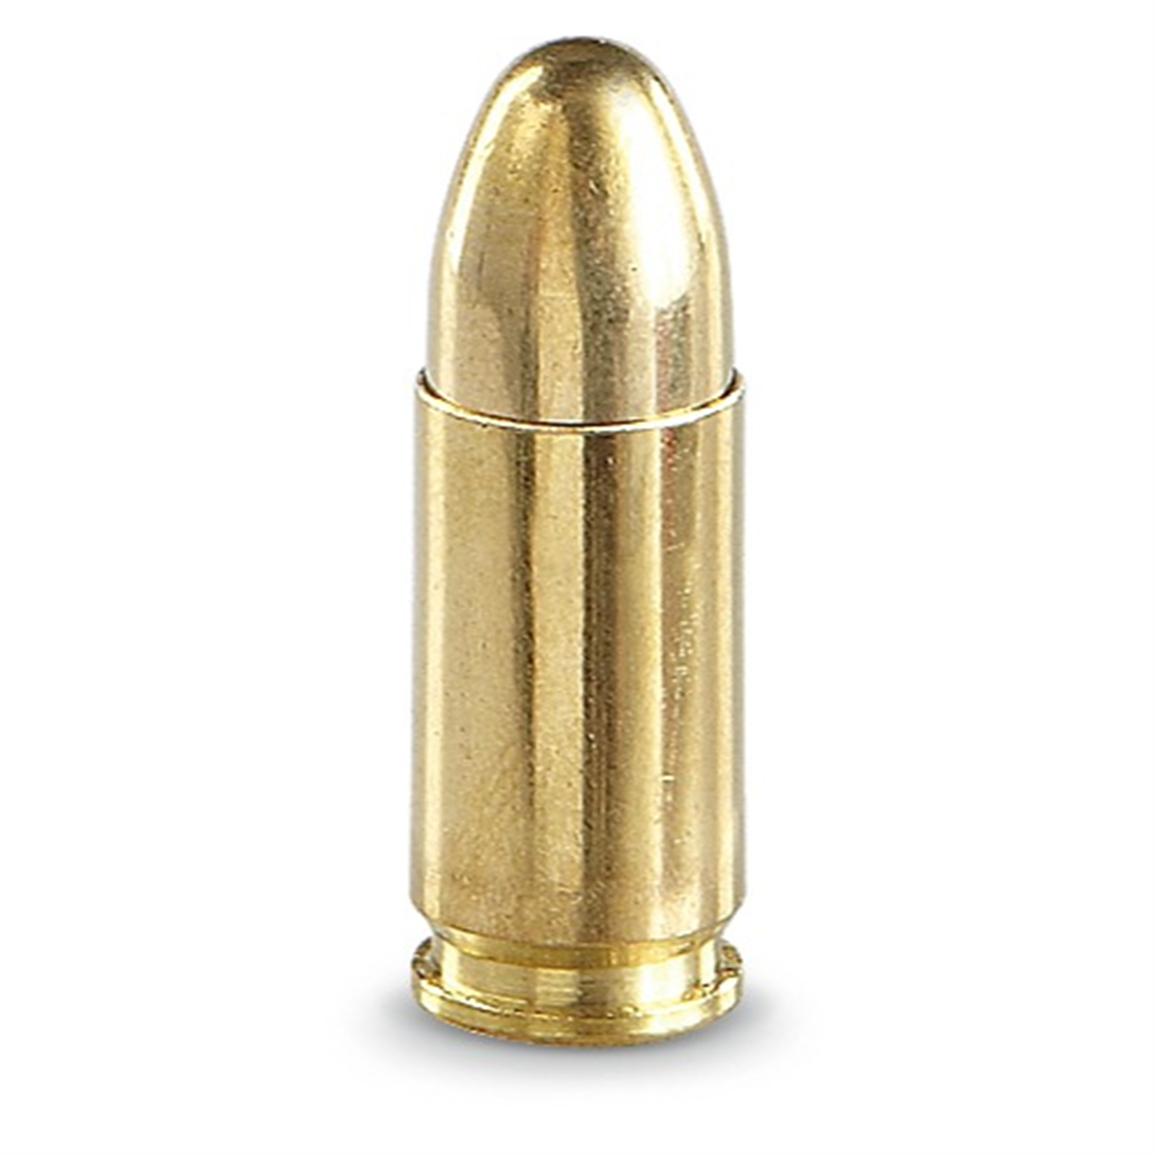 Sellier & Bellot, 9mm Luger, FMJ, 115 Grain, 250 Rounds - 179809, 9mm ...